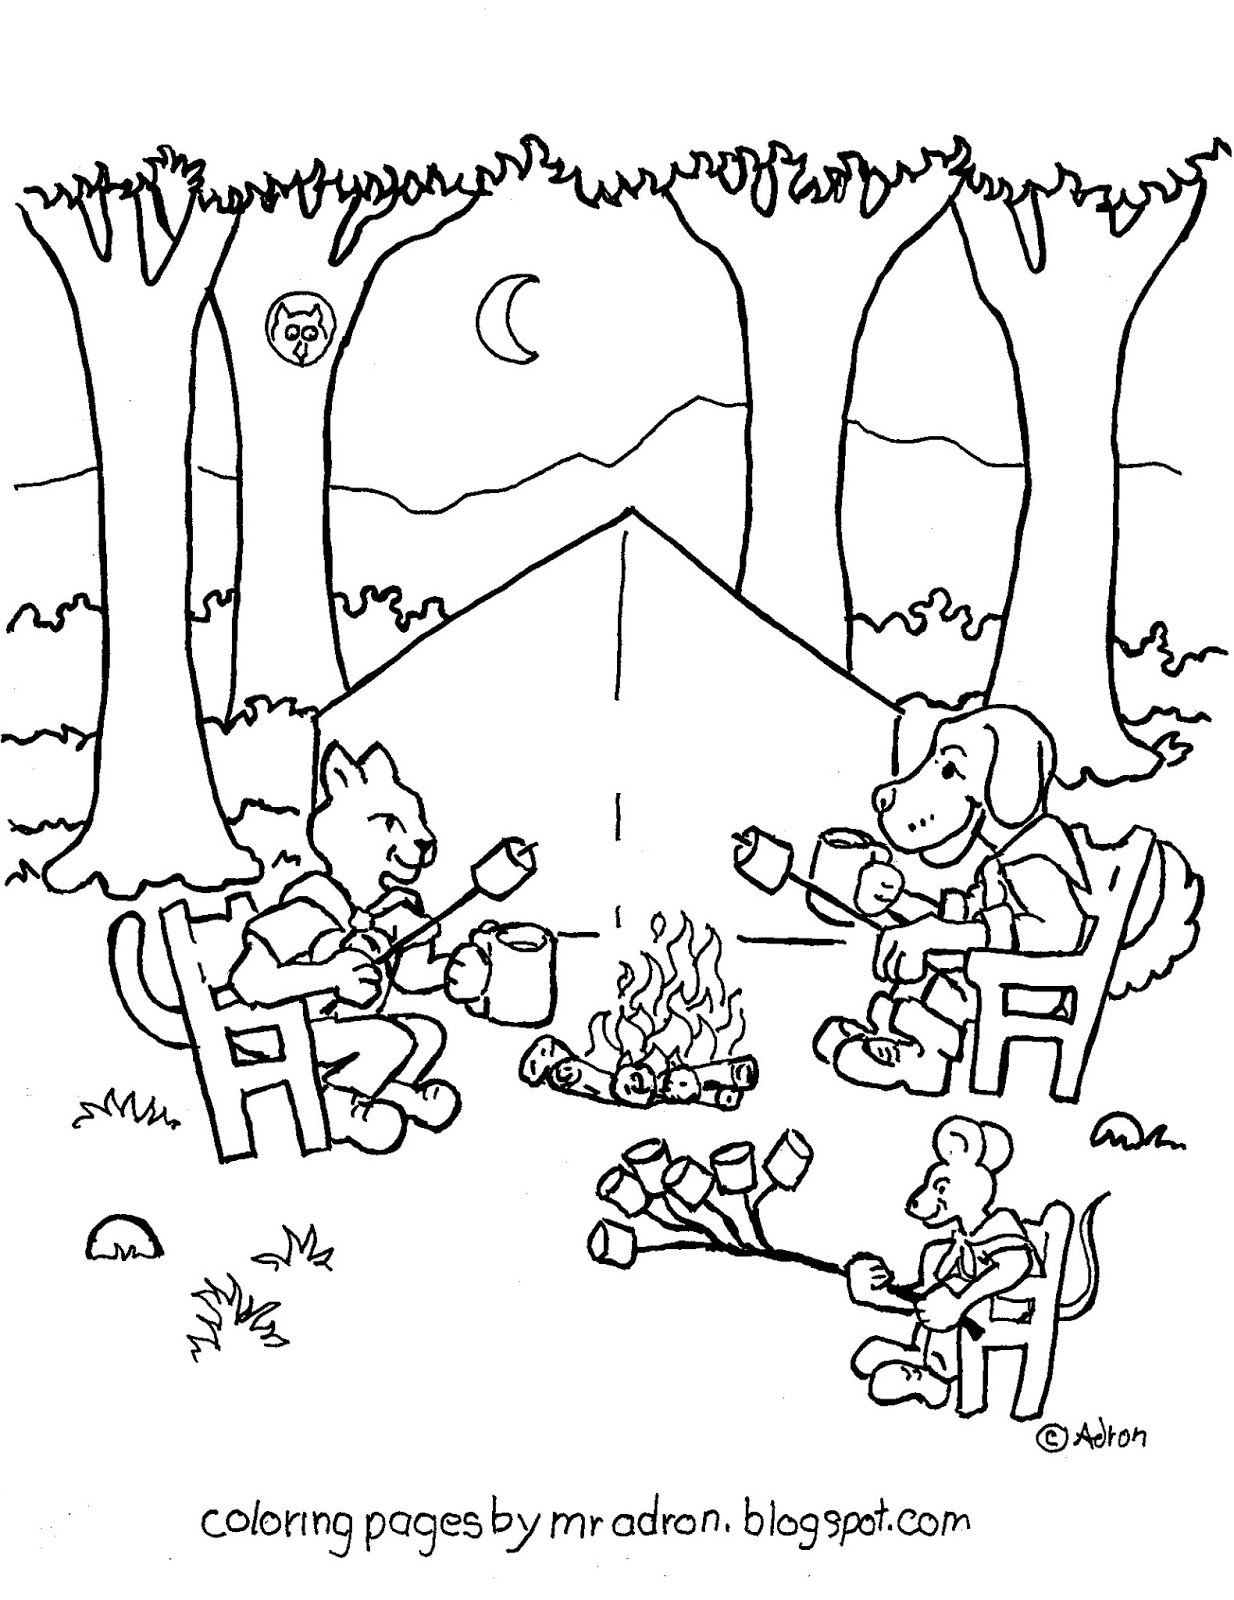 Coloring pages for kids by mr adron animal friends camp and roast marshmallows printable colorinâ camping coloring pages animal coloring books coloring pages